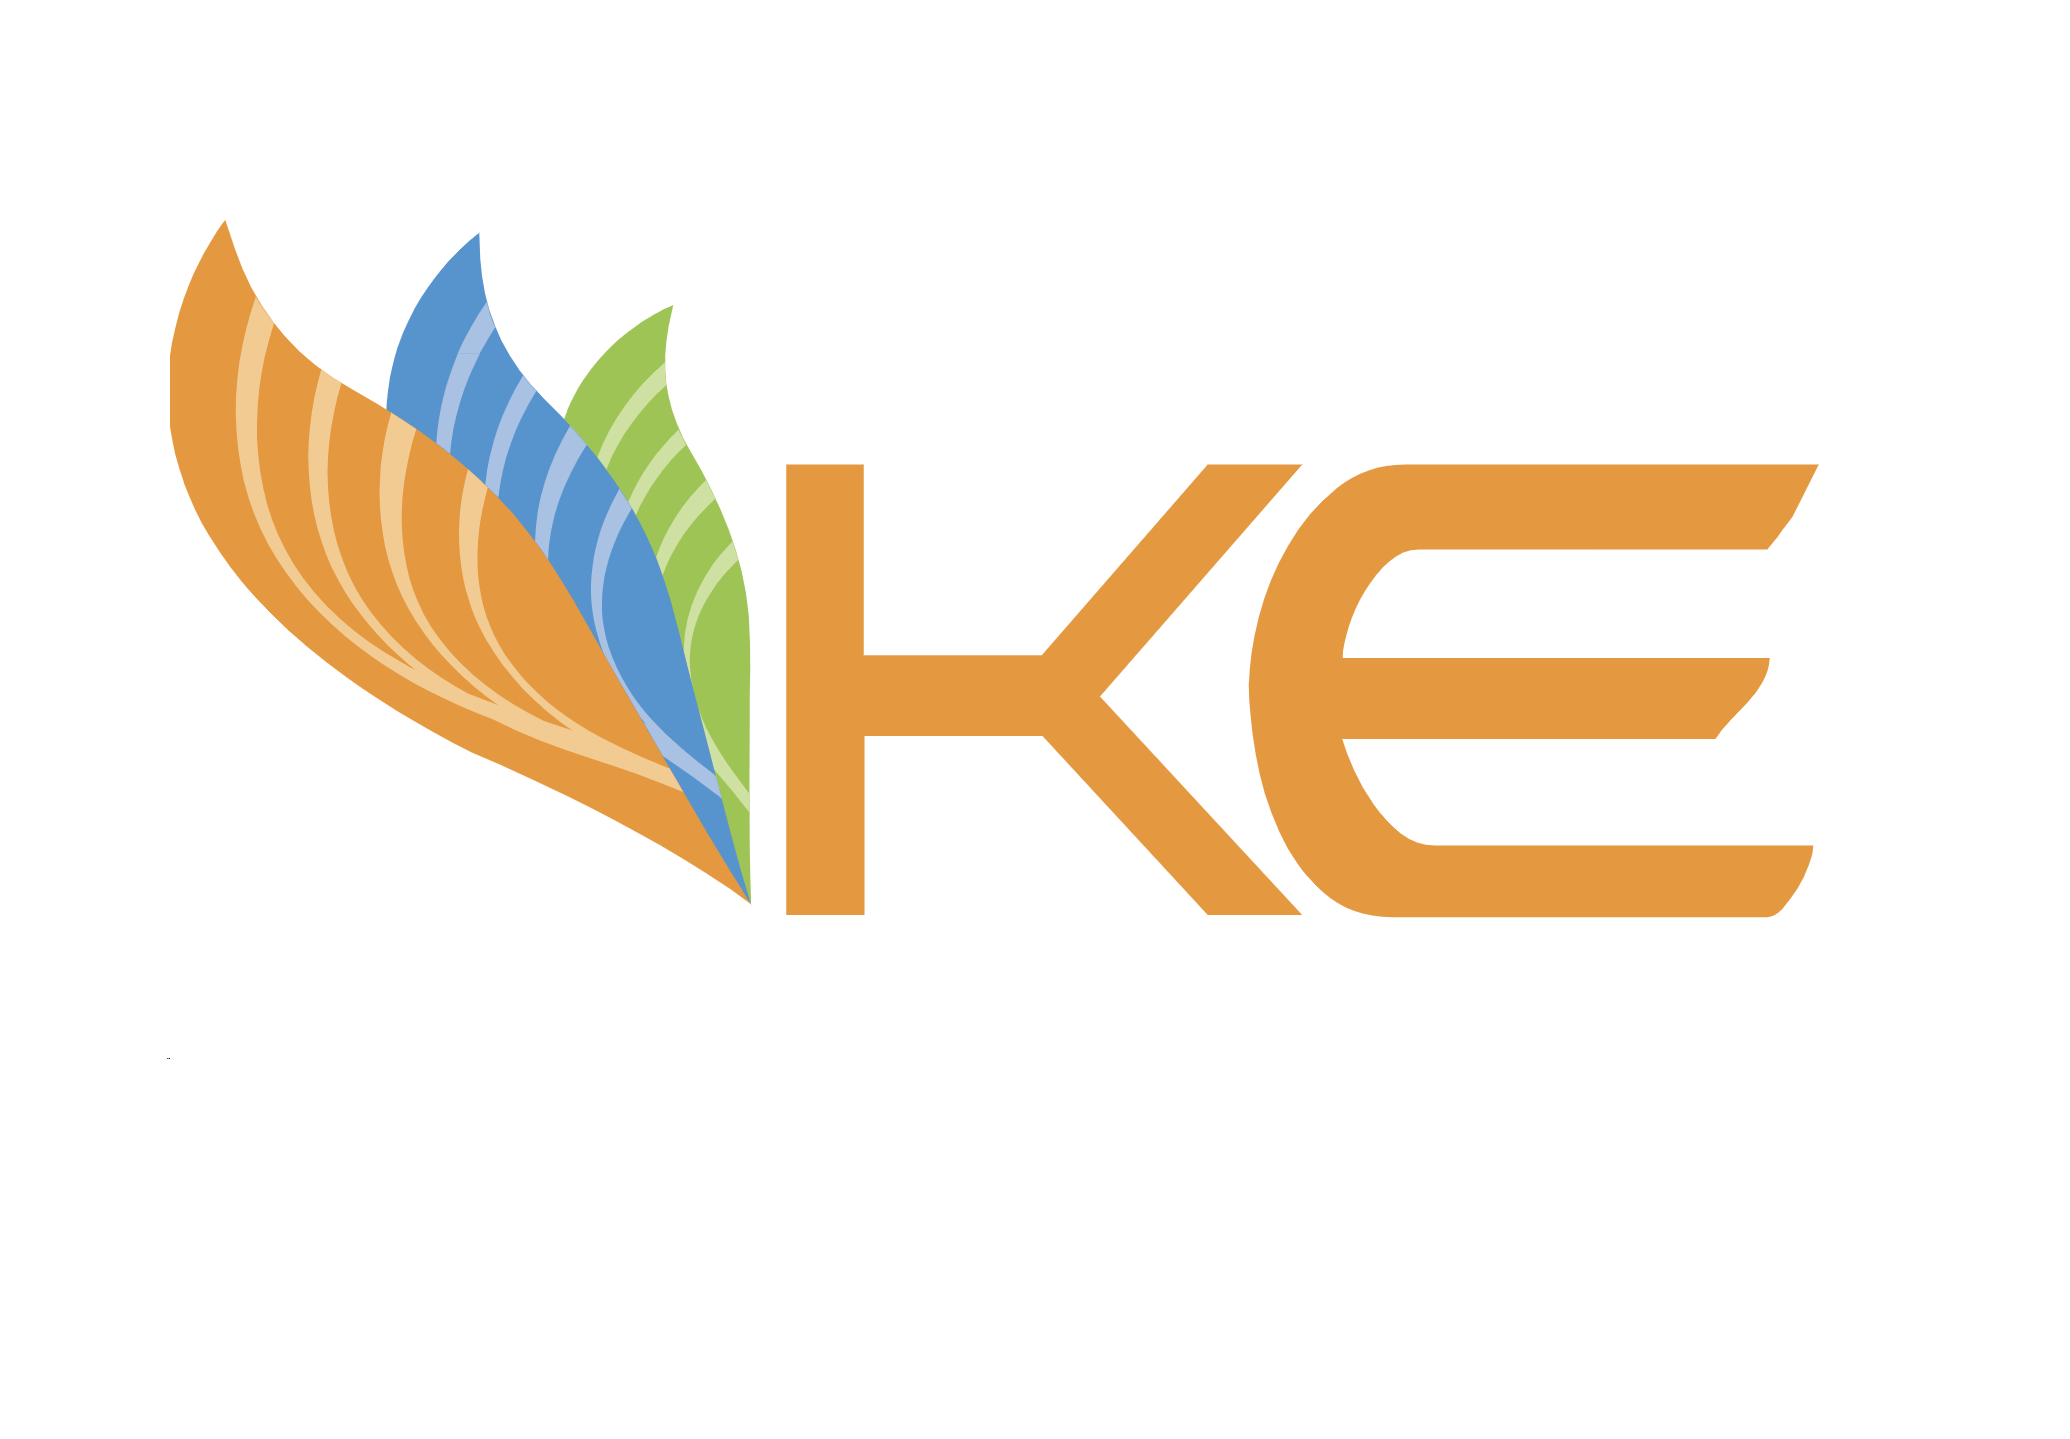 Shanghai Electric withdraws bid to acquire major stake in K-Electric